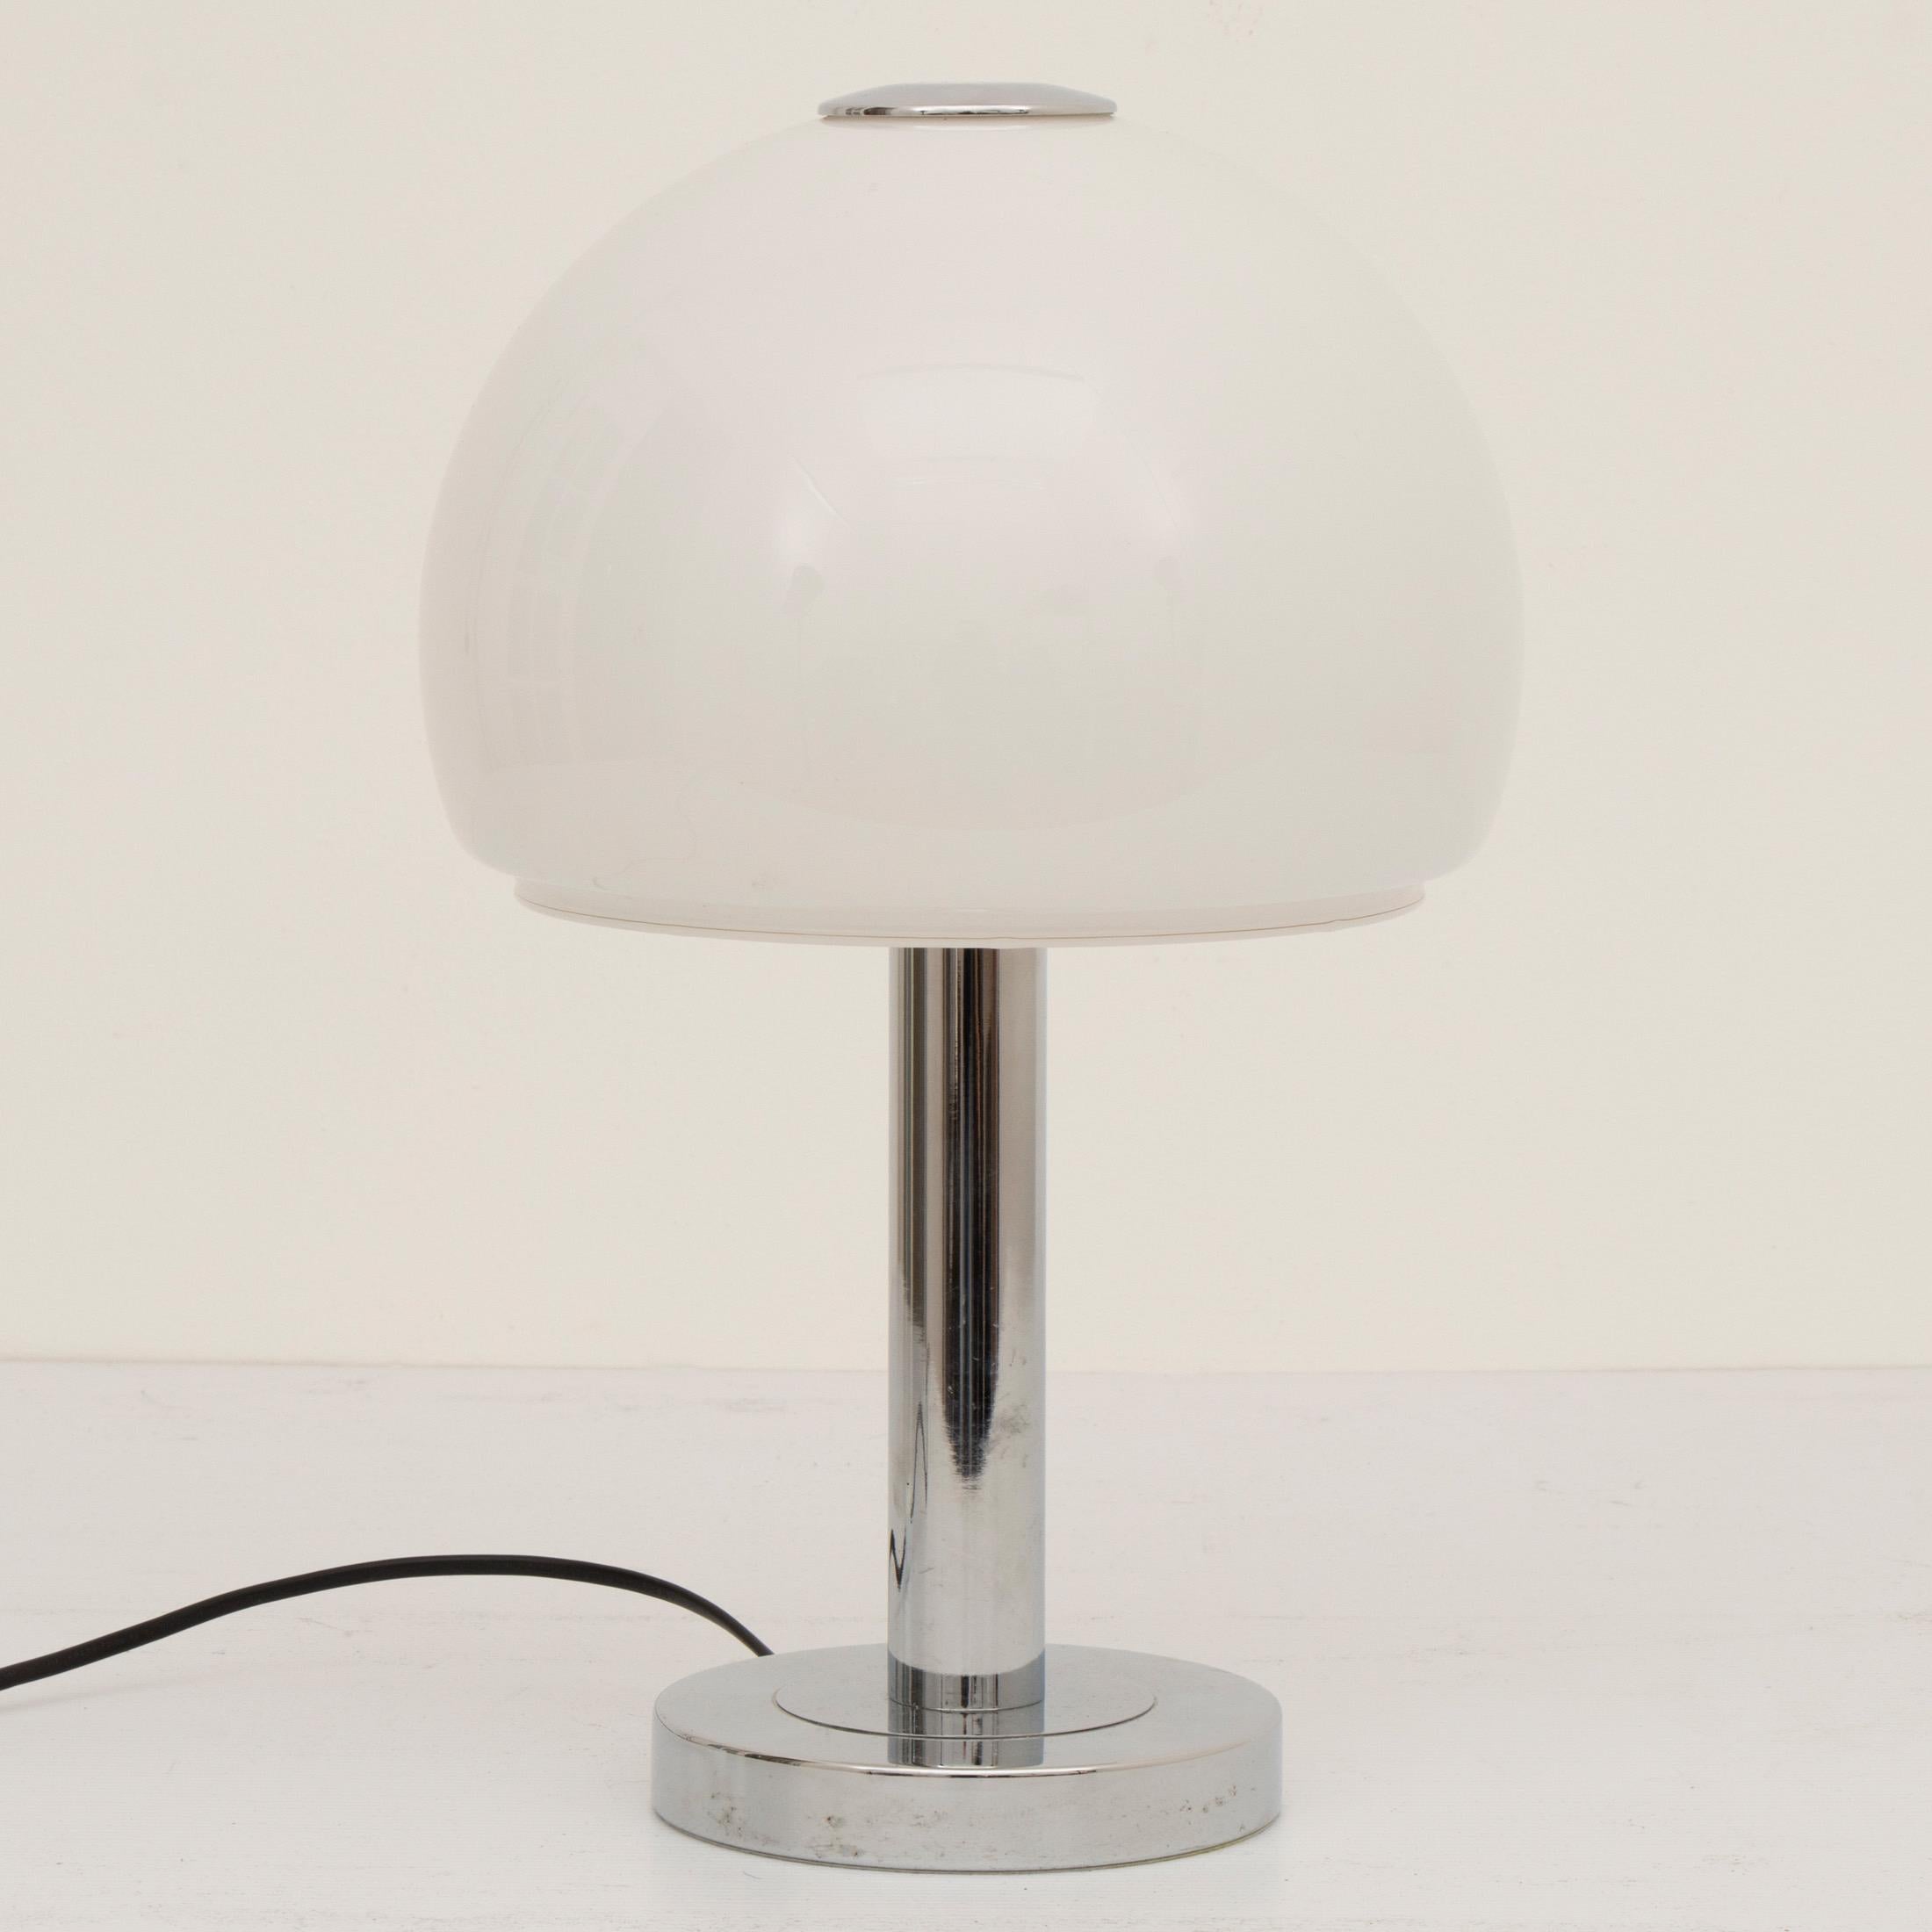 Midcentury domed glass lamp on a polished chrome base.
Measures: H 41 cm, W 26 cm, D 26 cm
Germany circa 1960.